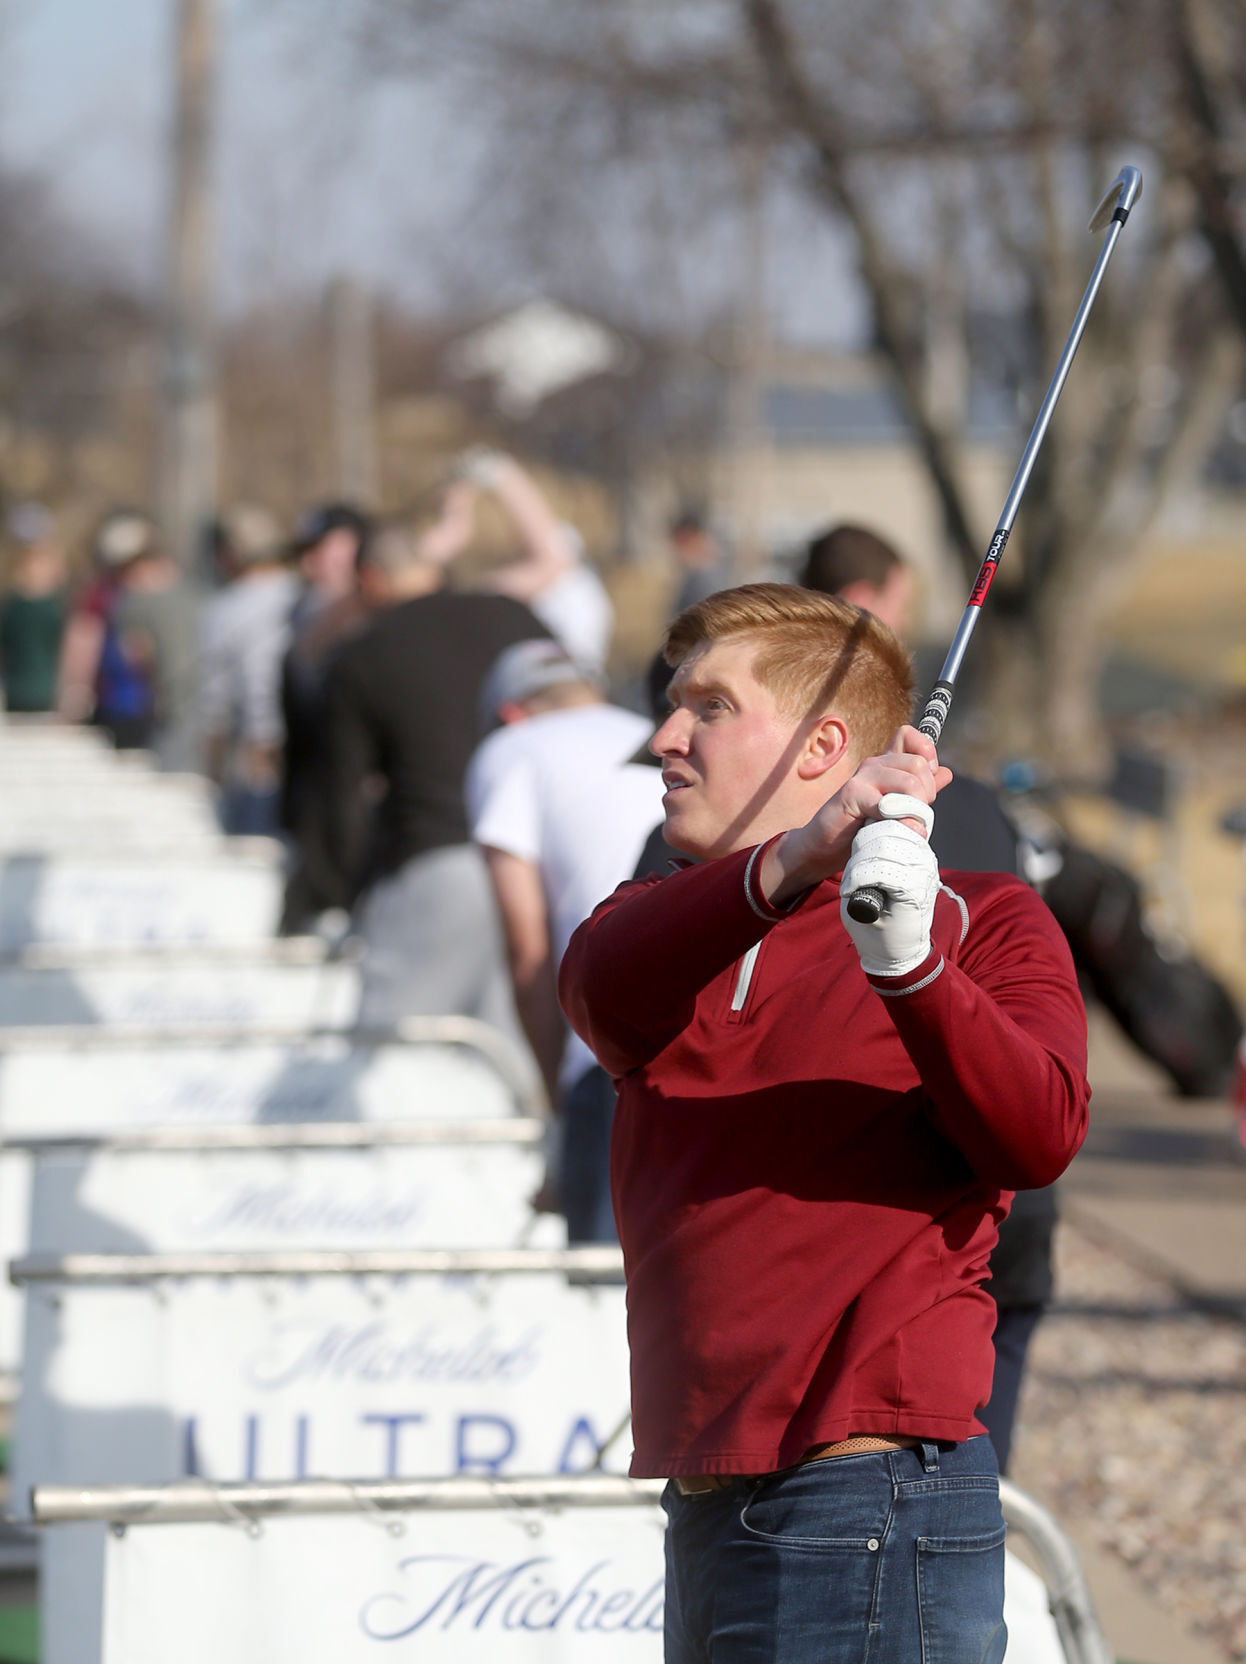 Jeremy Gerardy, of Dubuque, hits balls at Derby Grange Golf & Recreation in Dubuque on Wednesday, March 16, 2022.    PHOTO CREDIT: JESSICA REILLY